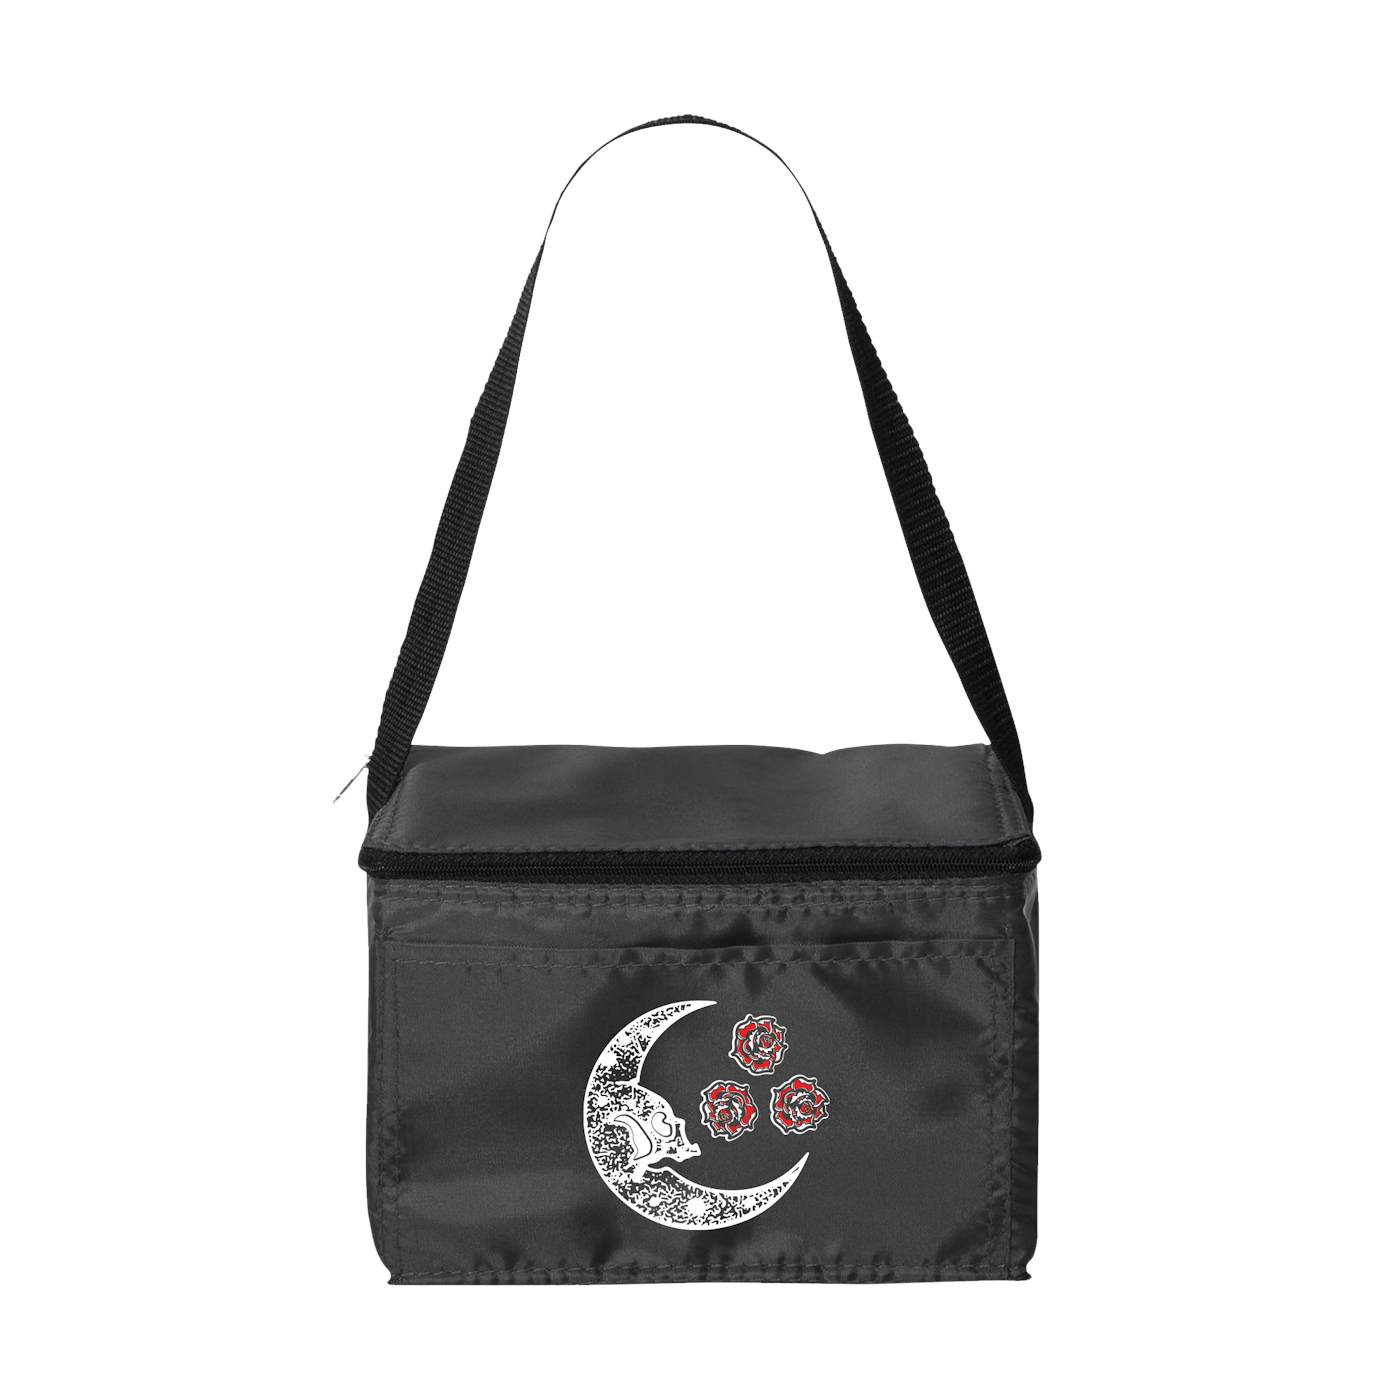 Currents "Rose Moon" Six Pack Cooler